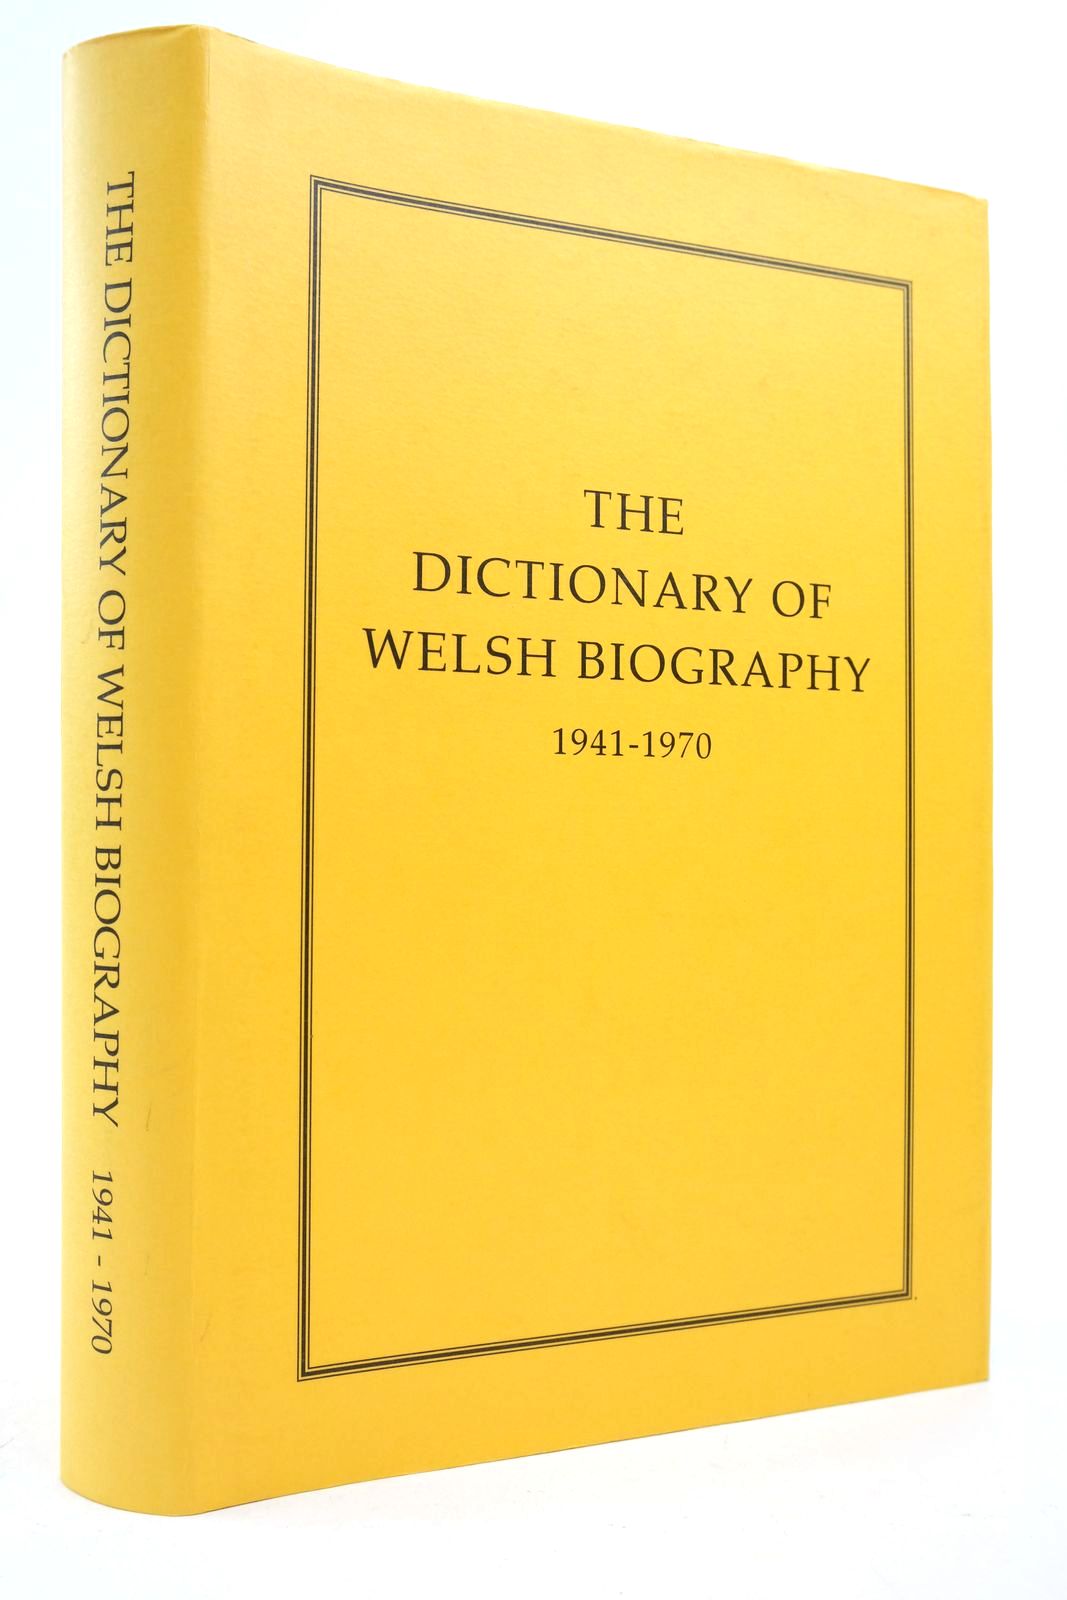 Photo of THE DICTIONARY OF WELSH BIOGRAPHY 1941-1970 published by The Honourable Society of Cymmrodorion (STOCK CODE: 2140652)  for sale by Stella & Rose's Books